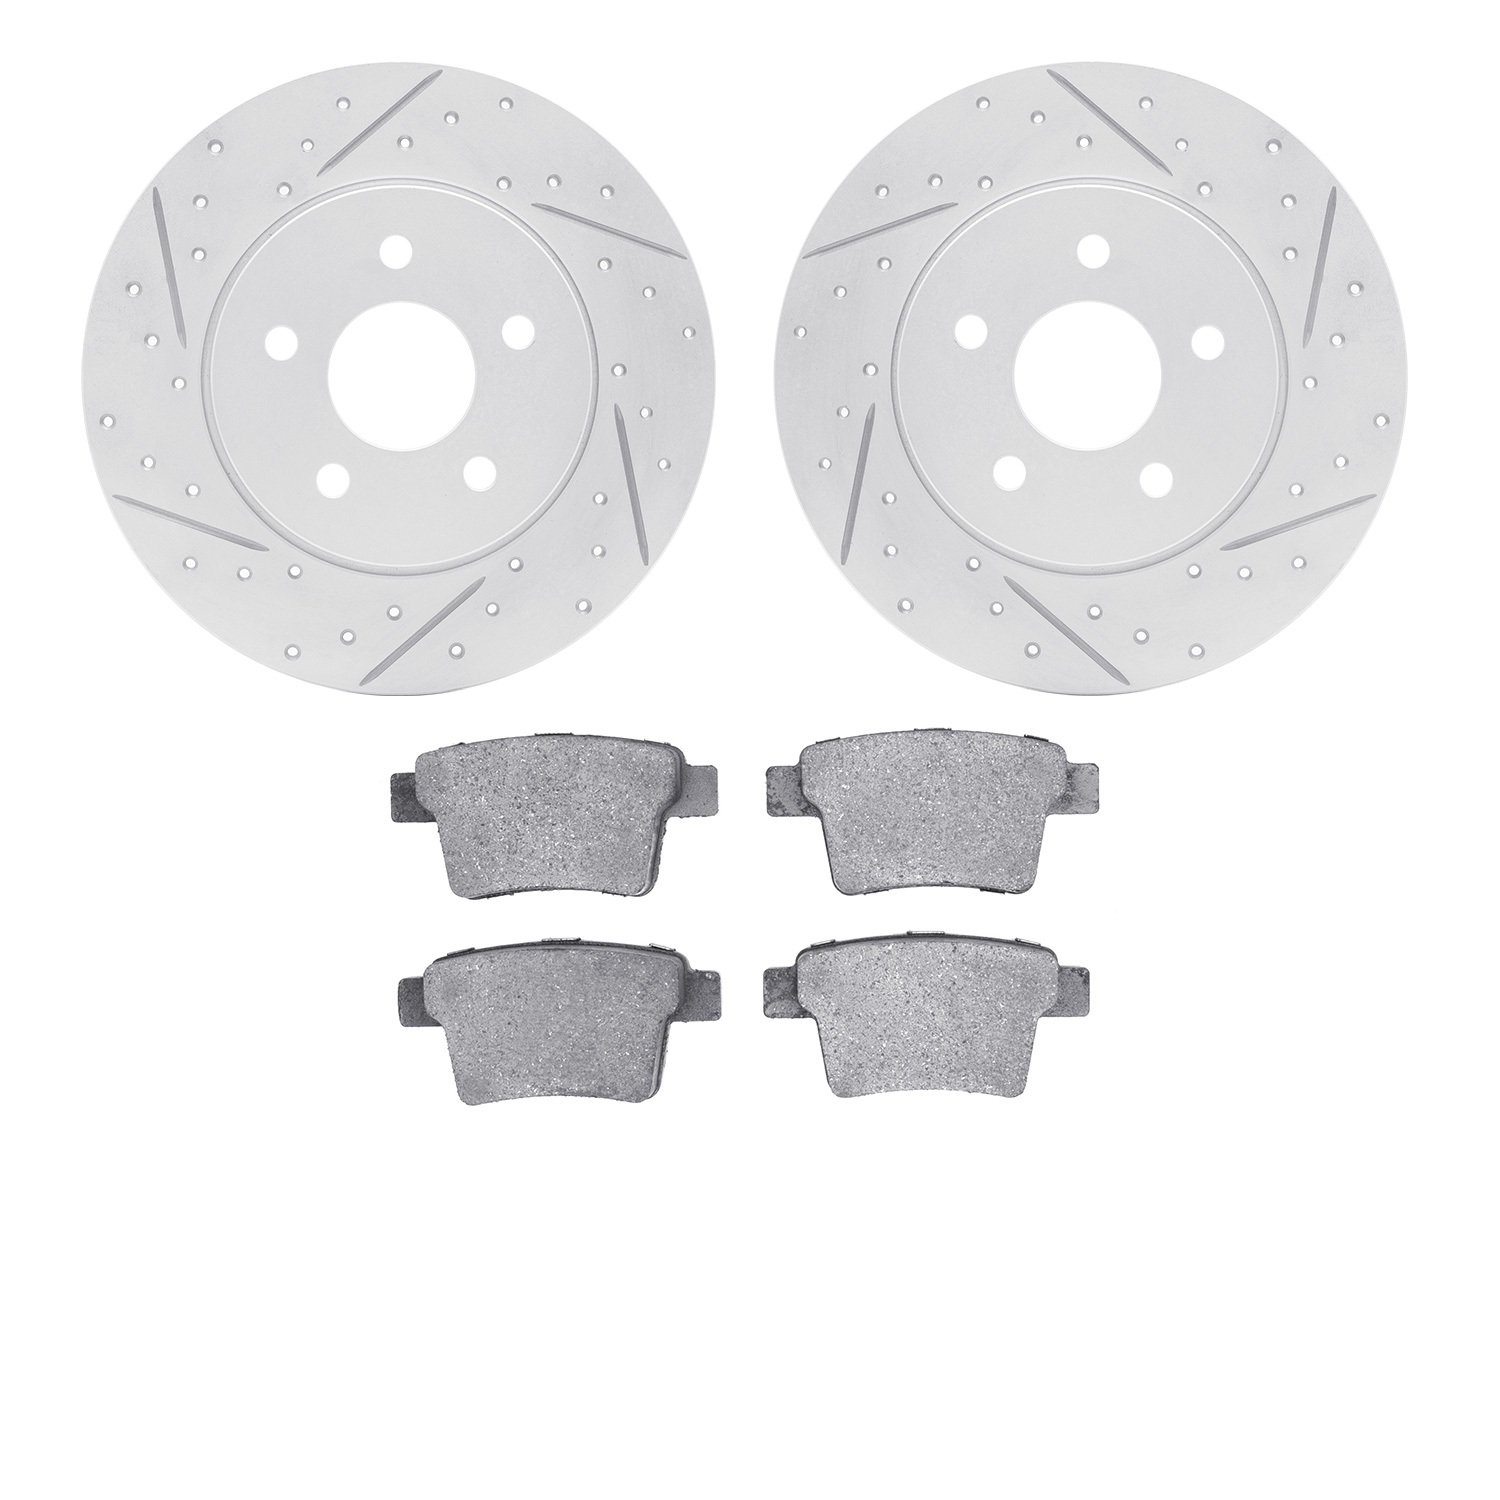 2502-20009 Geoperformance Drilled/Slotted Rotors w/5000 Advanced Brake Pads Kit, 2005-2008 Multiple Makes/Models, Position: Rear